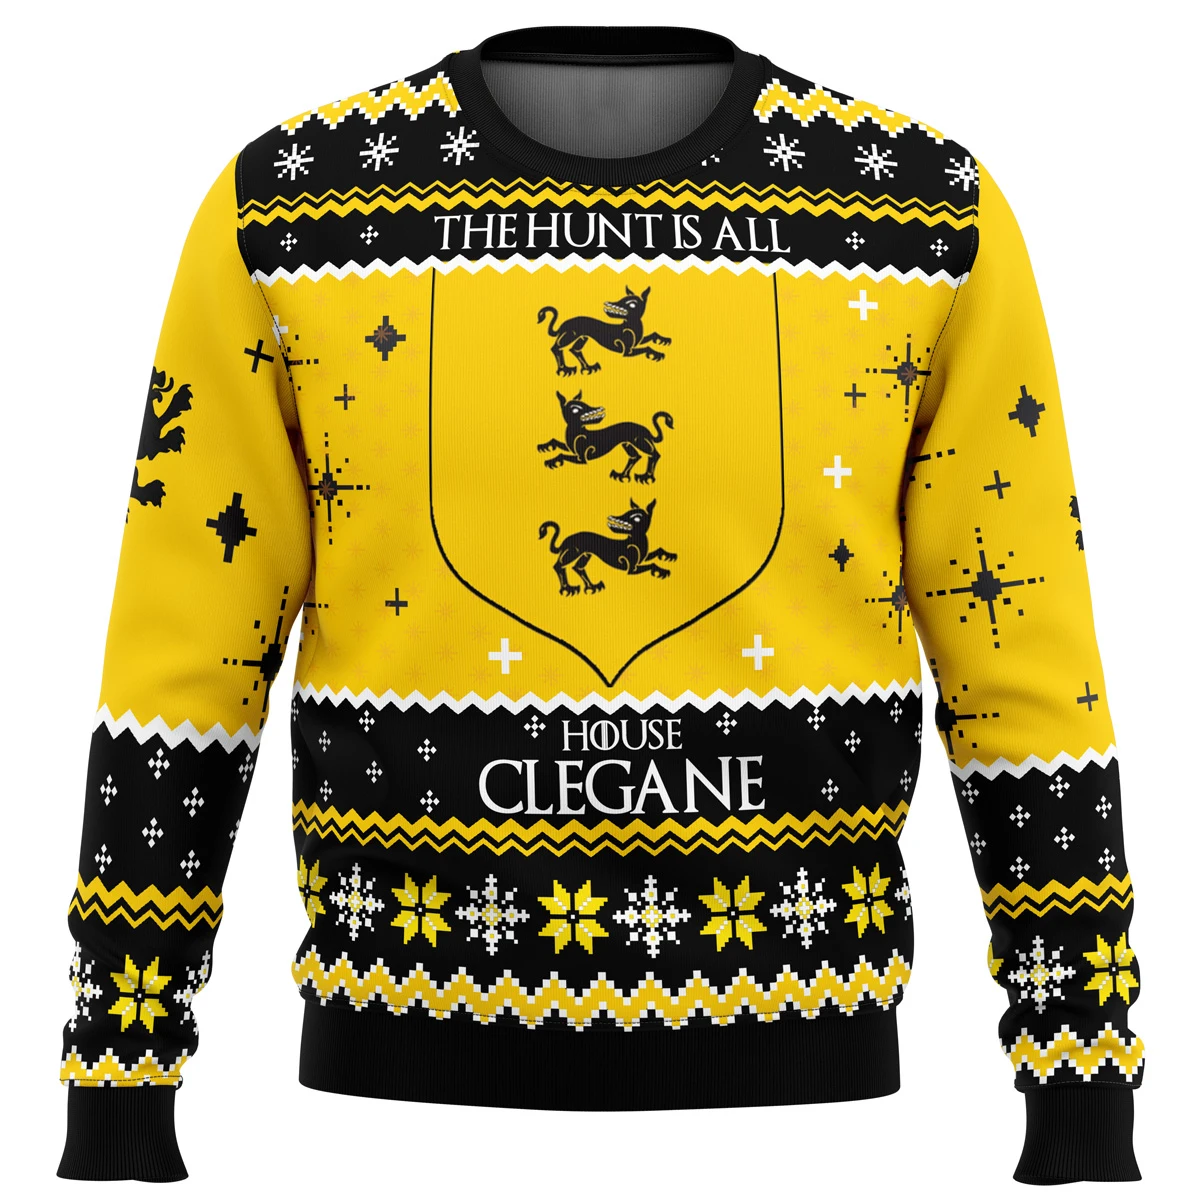 Game Of Thrones Christmas Is Coming Ugly Christmas Sweatshirt Gift Santa Claus Pullover Autumn Winter Men 10 - Game Of Thrones Shop